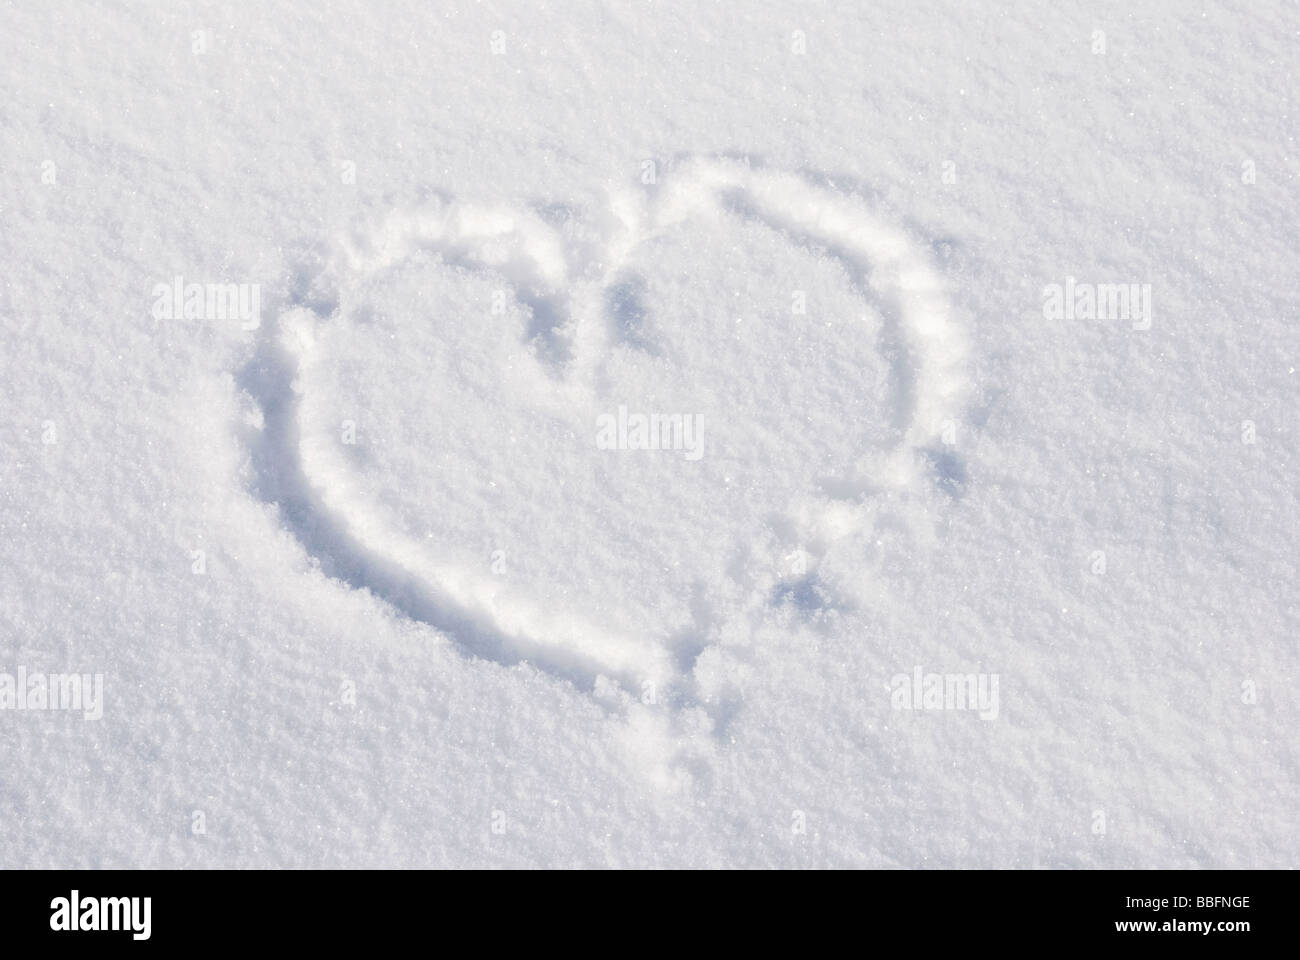 High angle view of a heart shape in snow Stock Photo